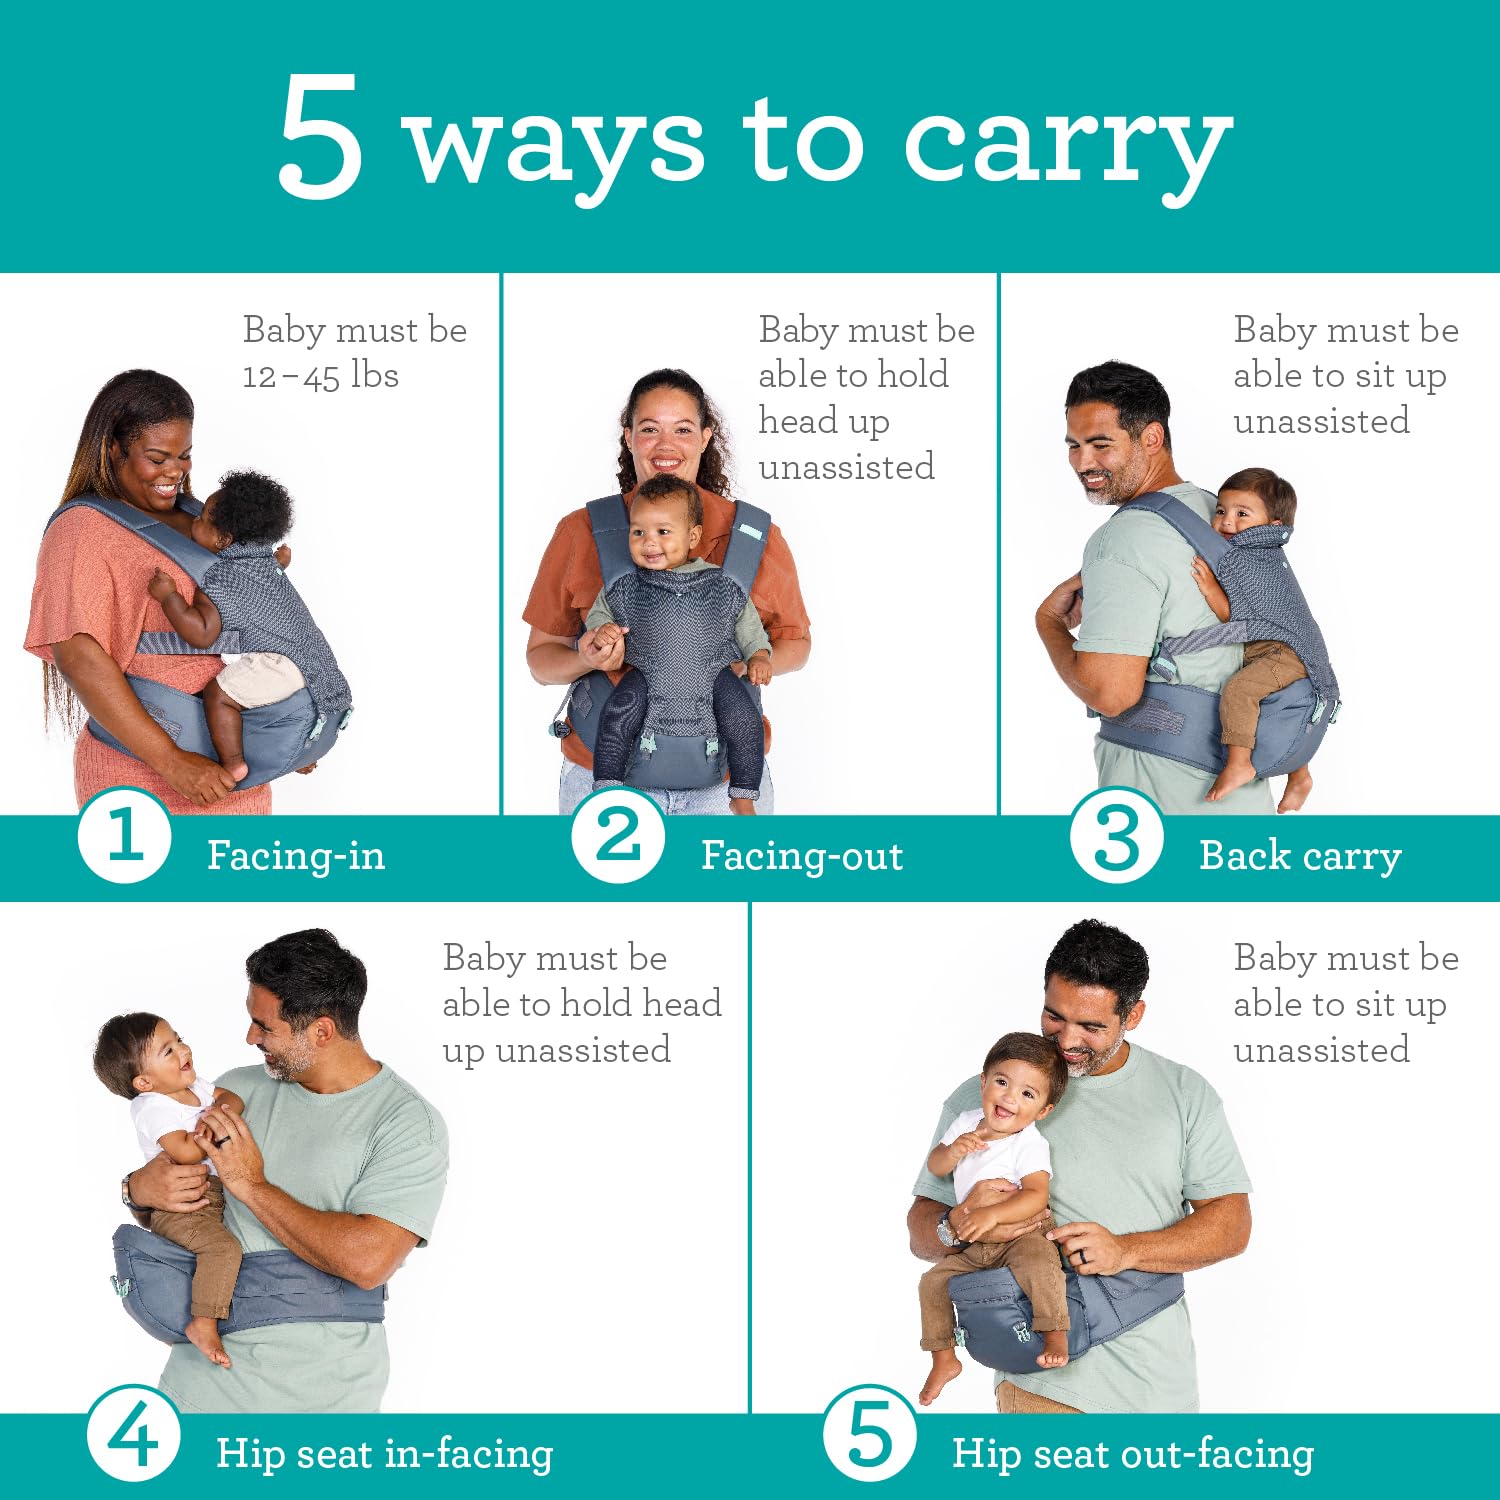 Infantino Hip Rider Plus 5-in-1 Hip Seat Carrier - 2 Easy-to-Use Ergonomic Carriers in 1 for Babies and Toddlers with Storage Pocket